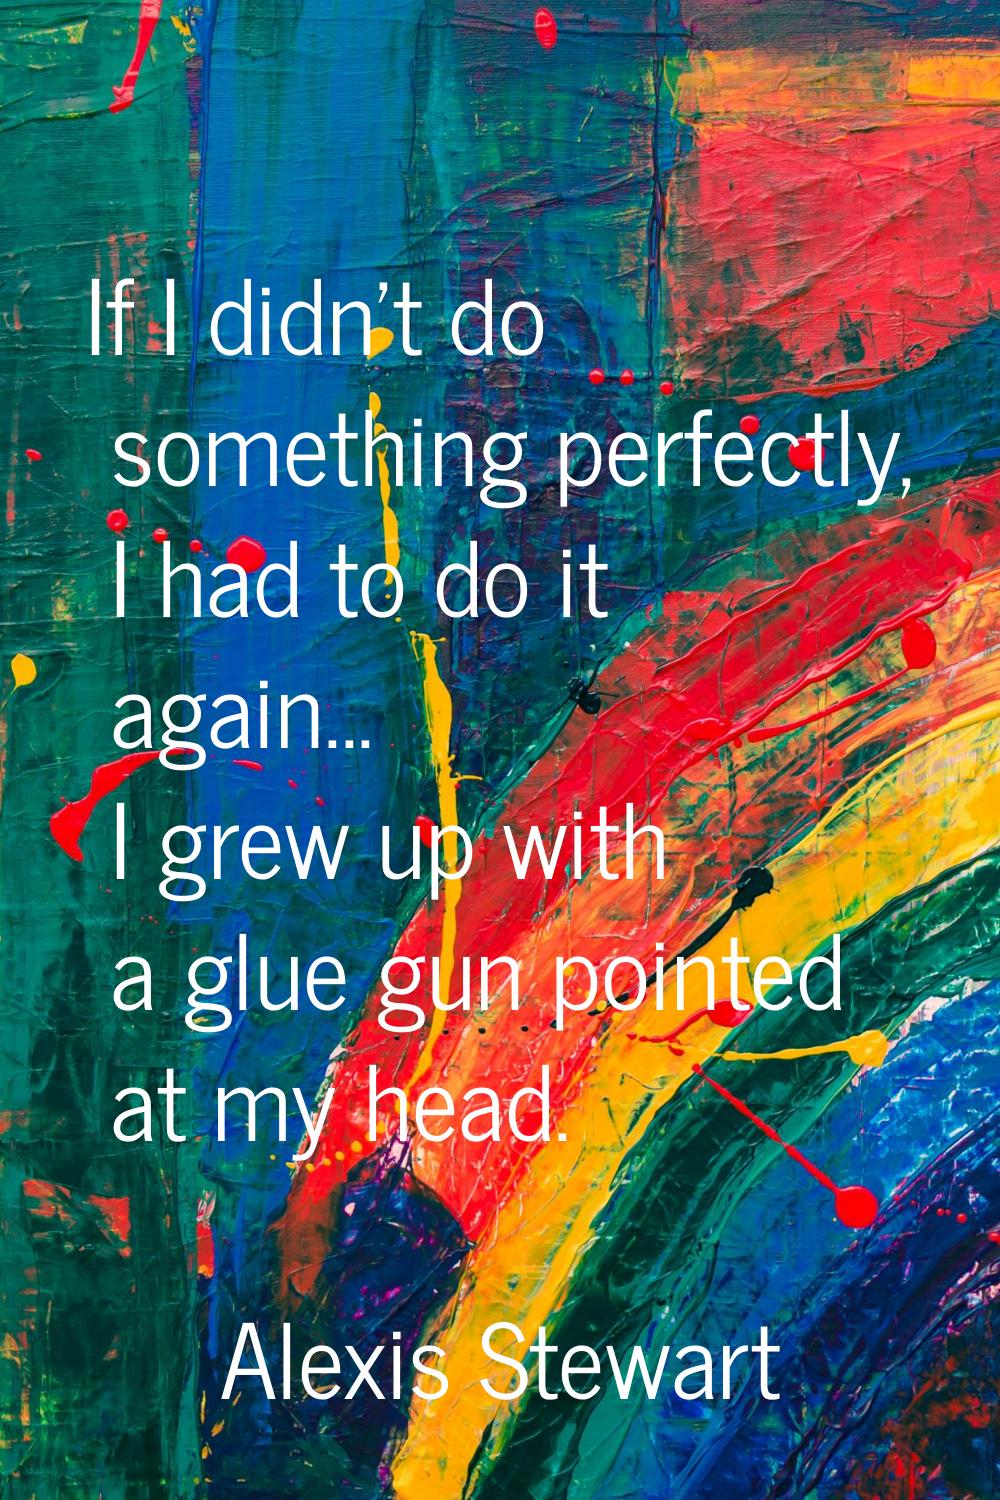 If I didn't do something perfectly, I had to do it again... I grew up with a glue gun pointed at my